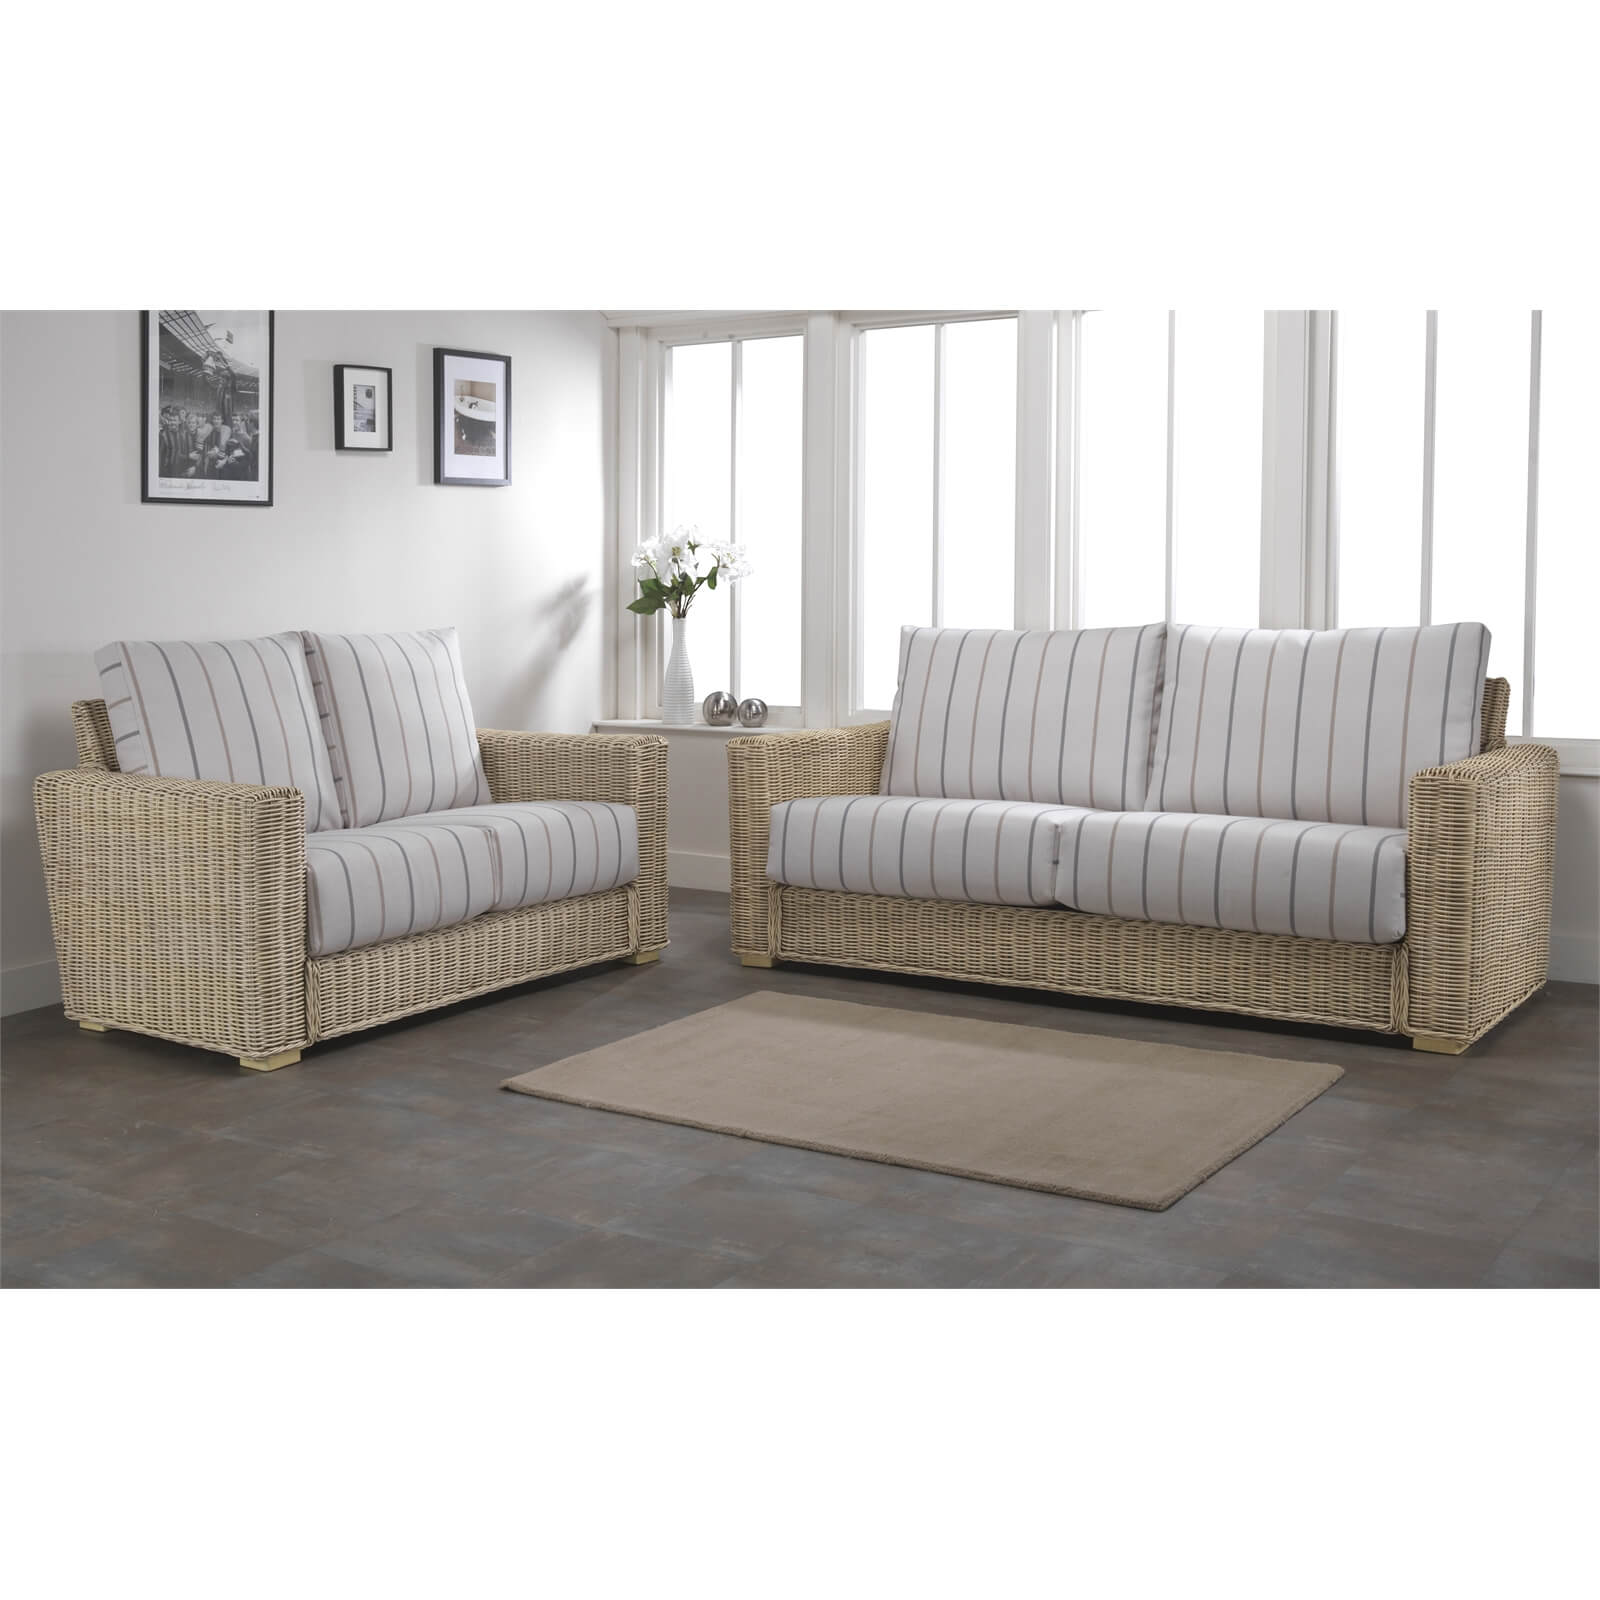 Burford 3 Seater Sofa In Linen Taupe